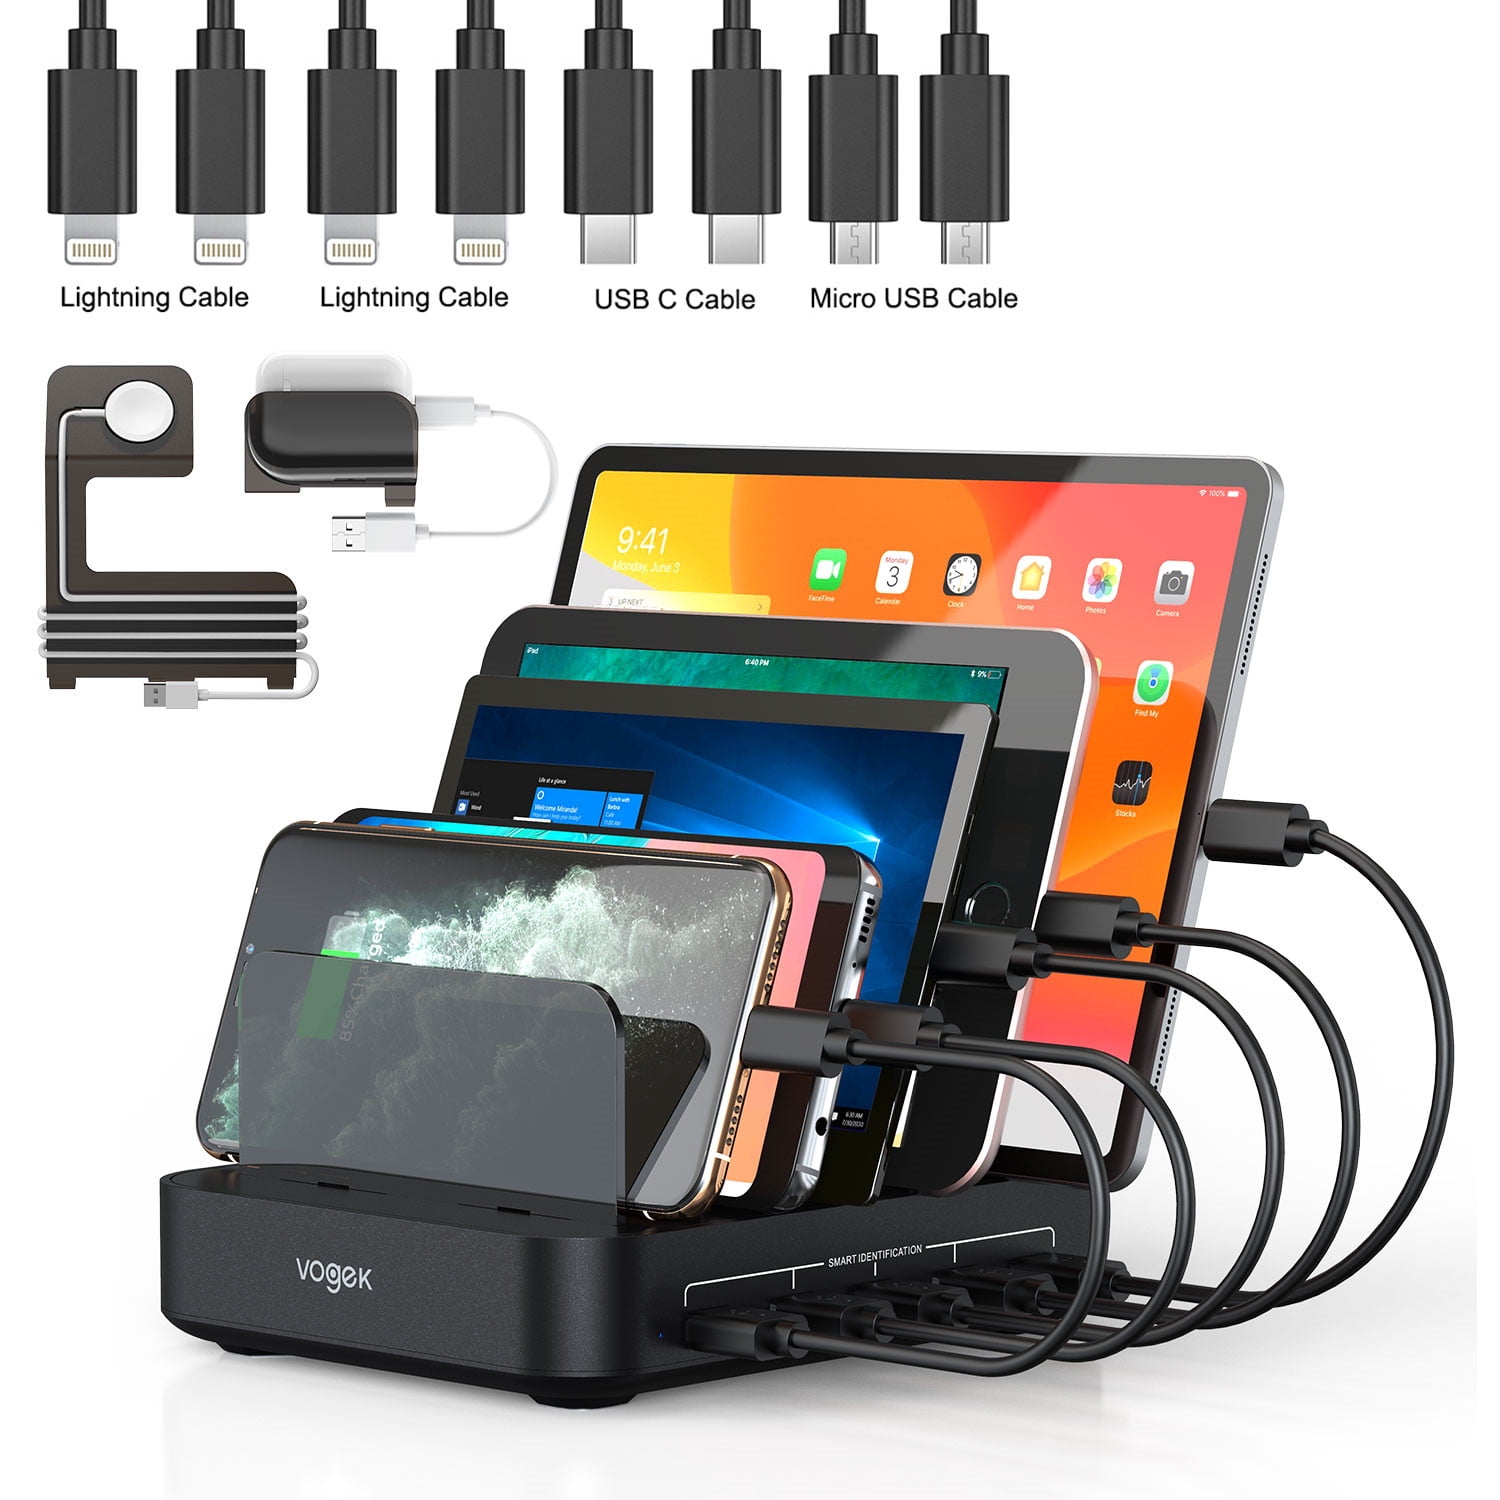 Charging Station, 50W 5-Port USB Charging Station for Multiple Device with 8 Short Mixed Cables Watch & Airpod Stand Included for Cell Phones, Phones, Tablets, iWatch airpods, Black - Walmart.com